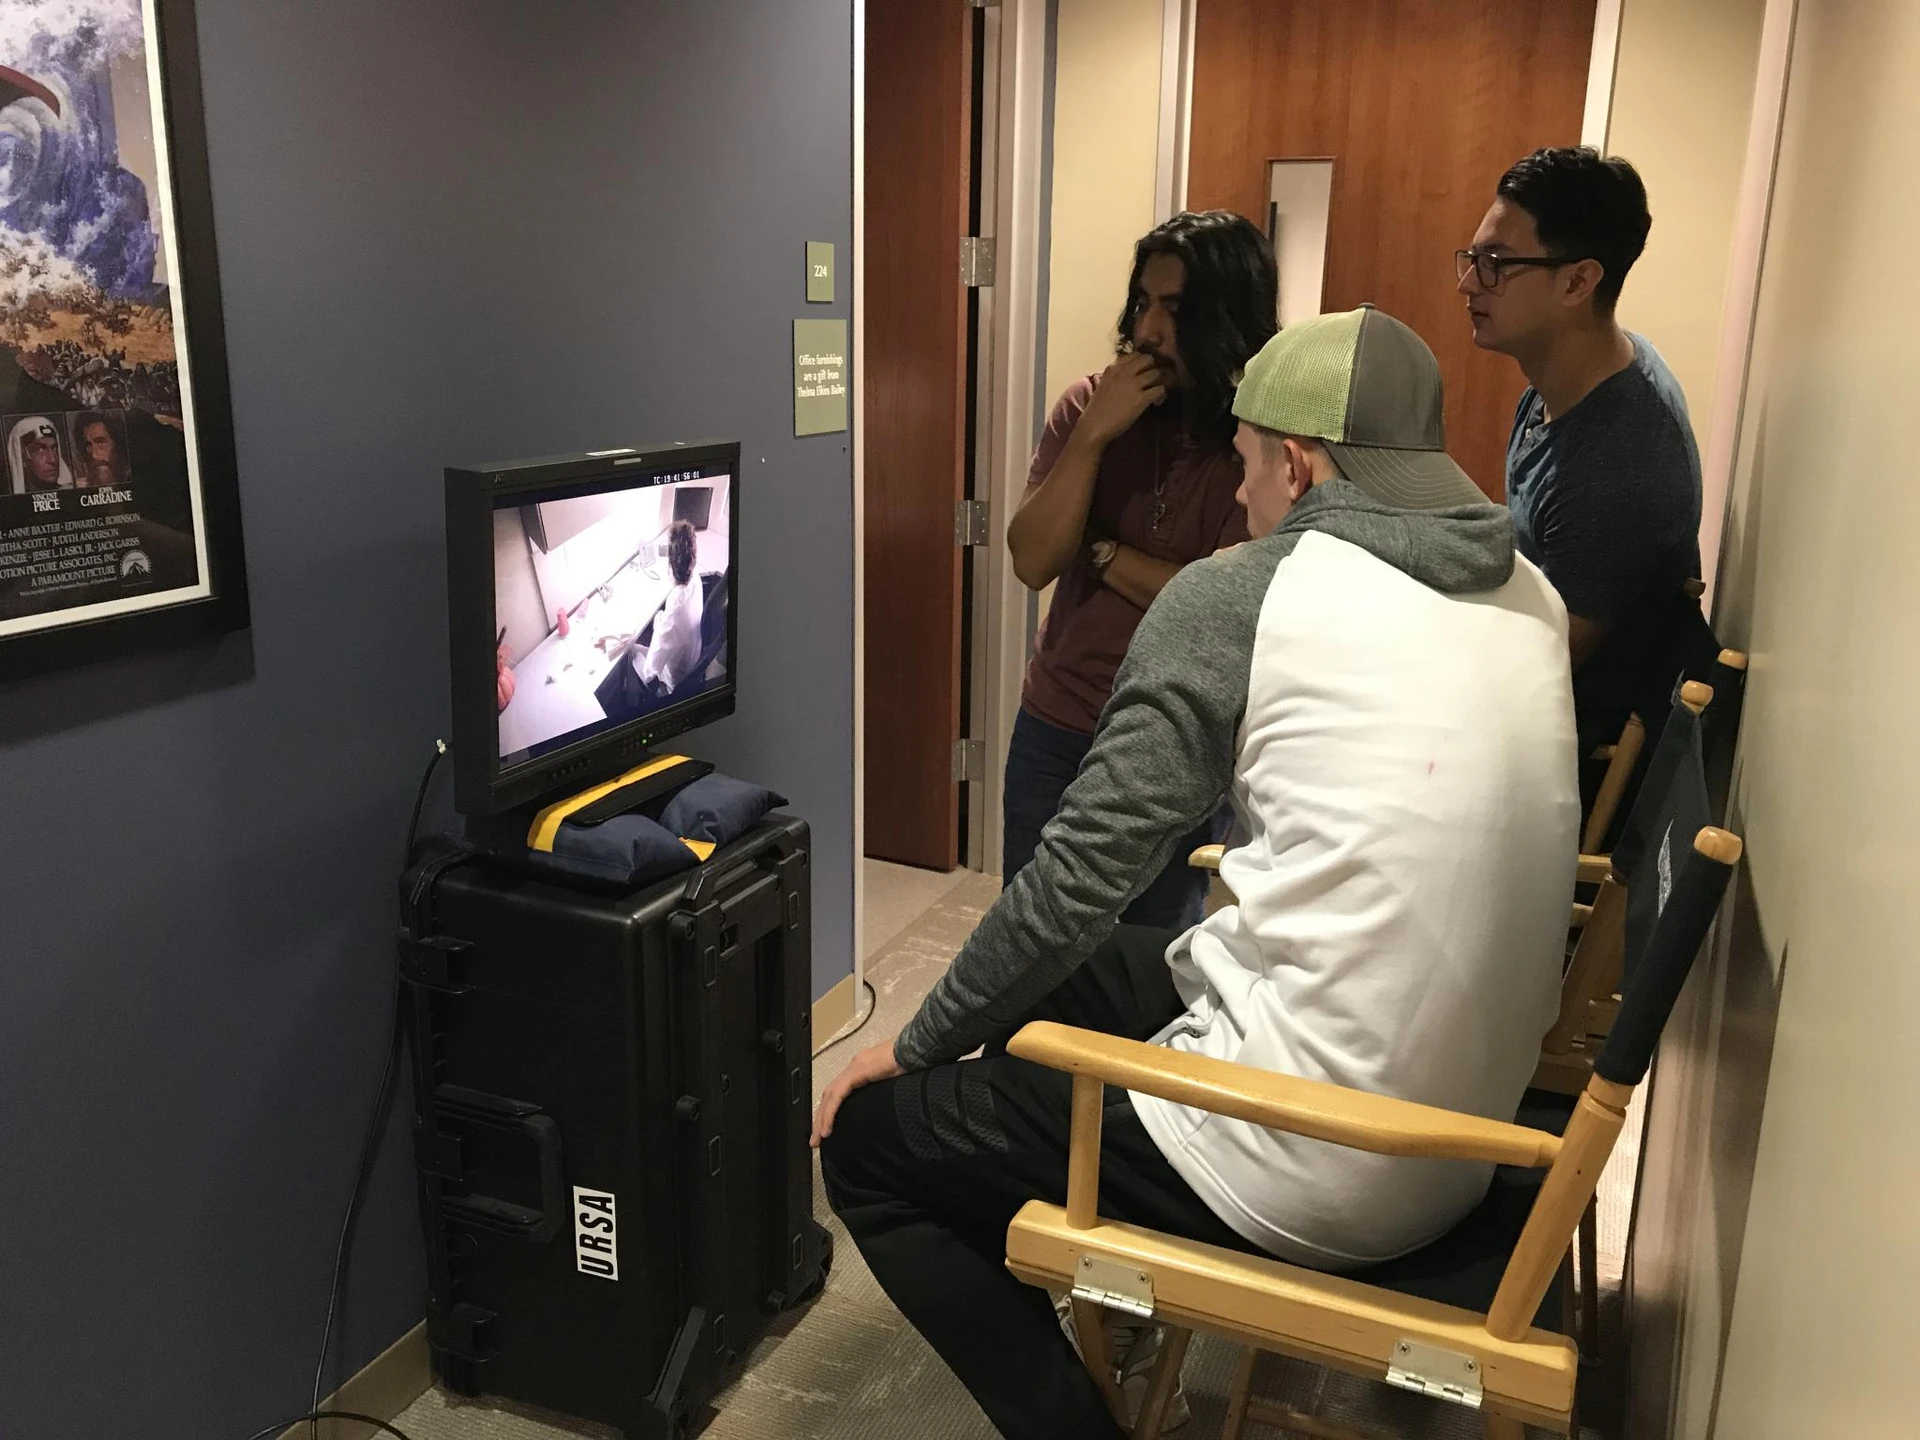 In front of three men is a monitar that shows what currently is being recorded in a different room